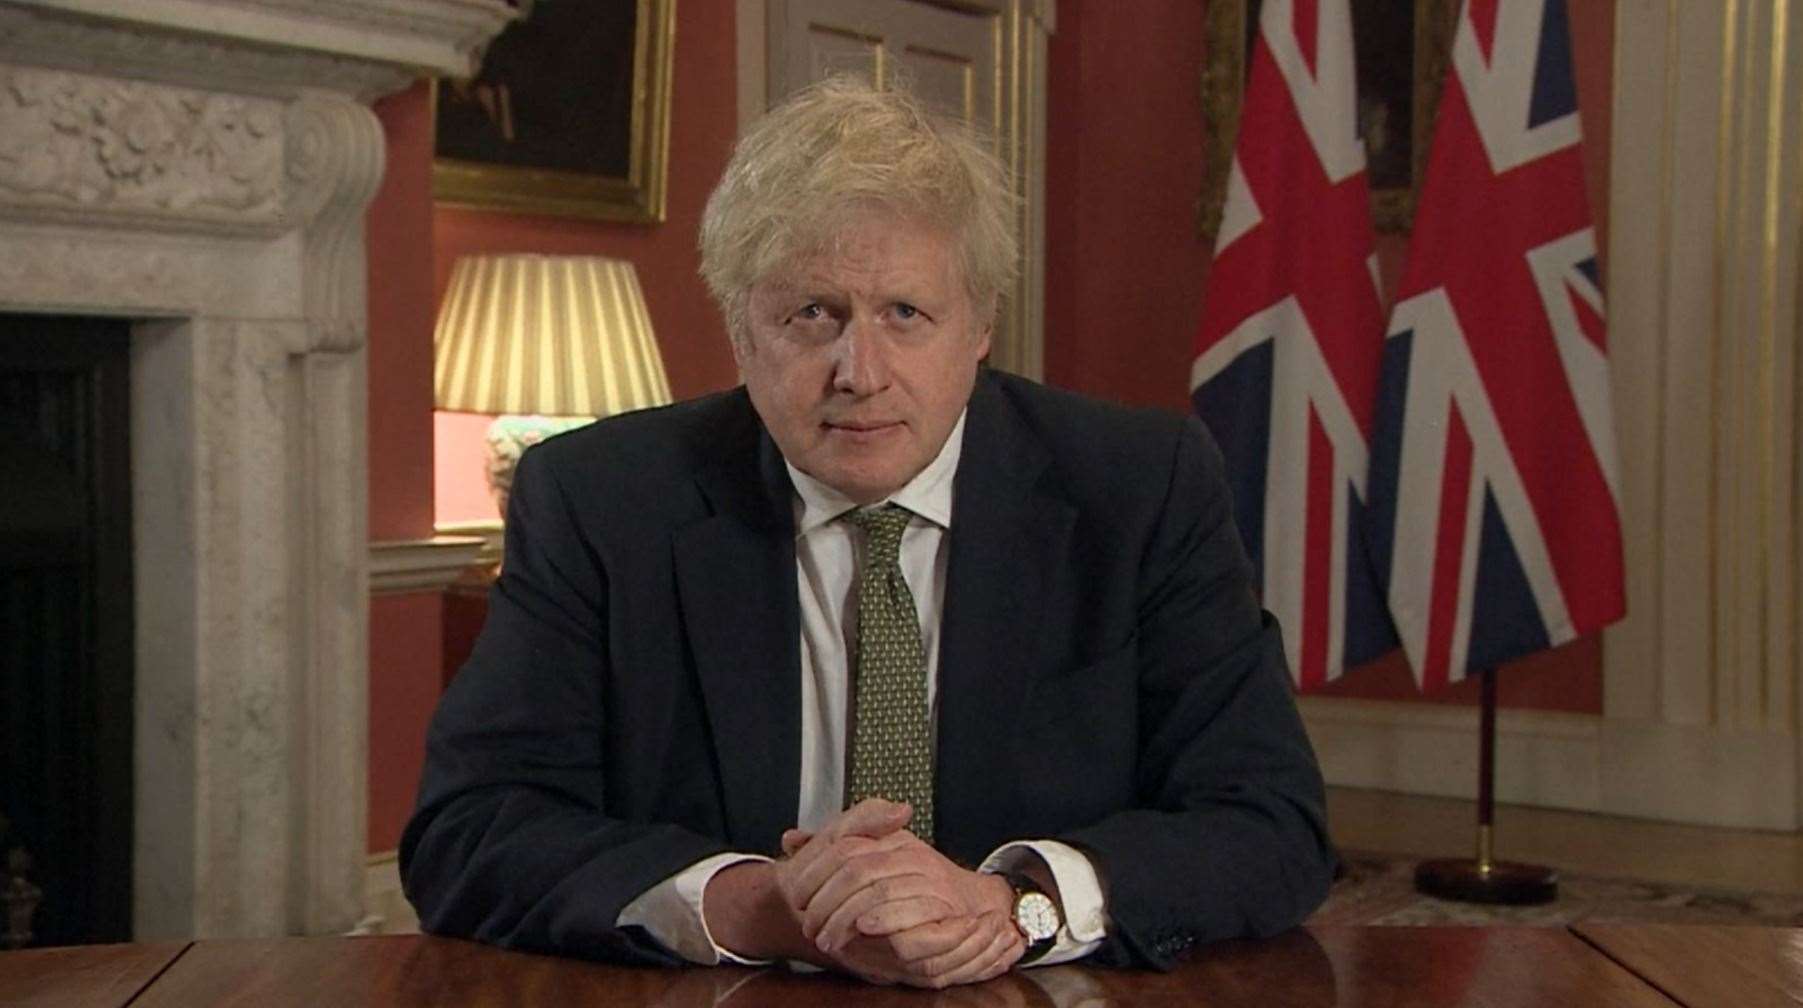 Prime Minister Boris Johnson making a televised address to the nation from 10 Downing Street, London, setting out new emergency measures to control the spread of coronavirus in England. Picture: PA